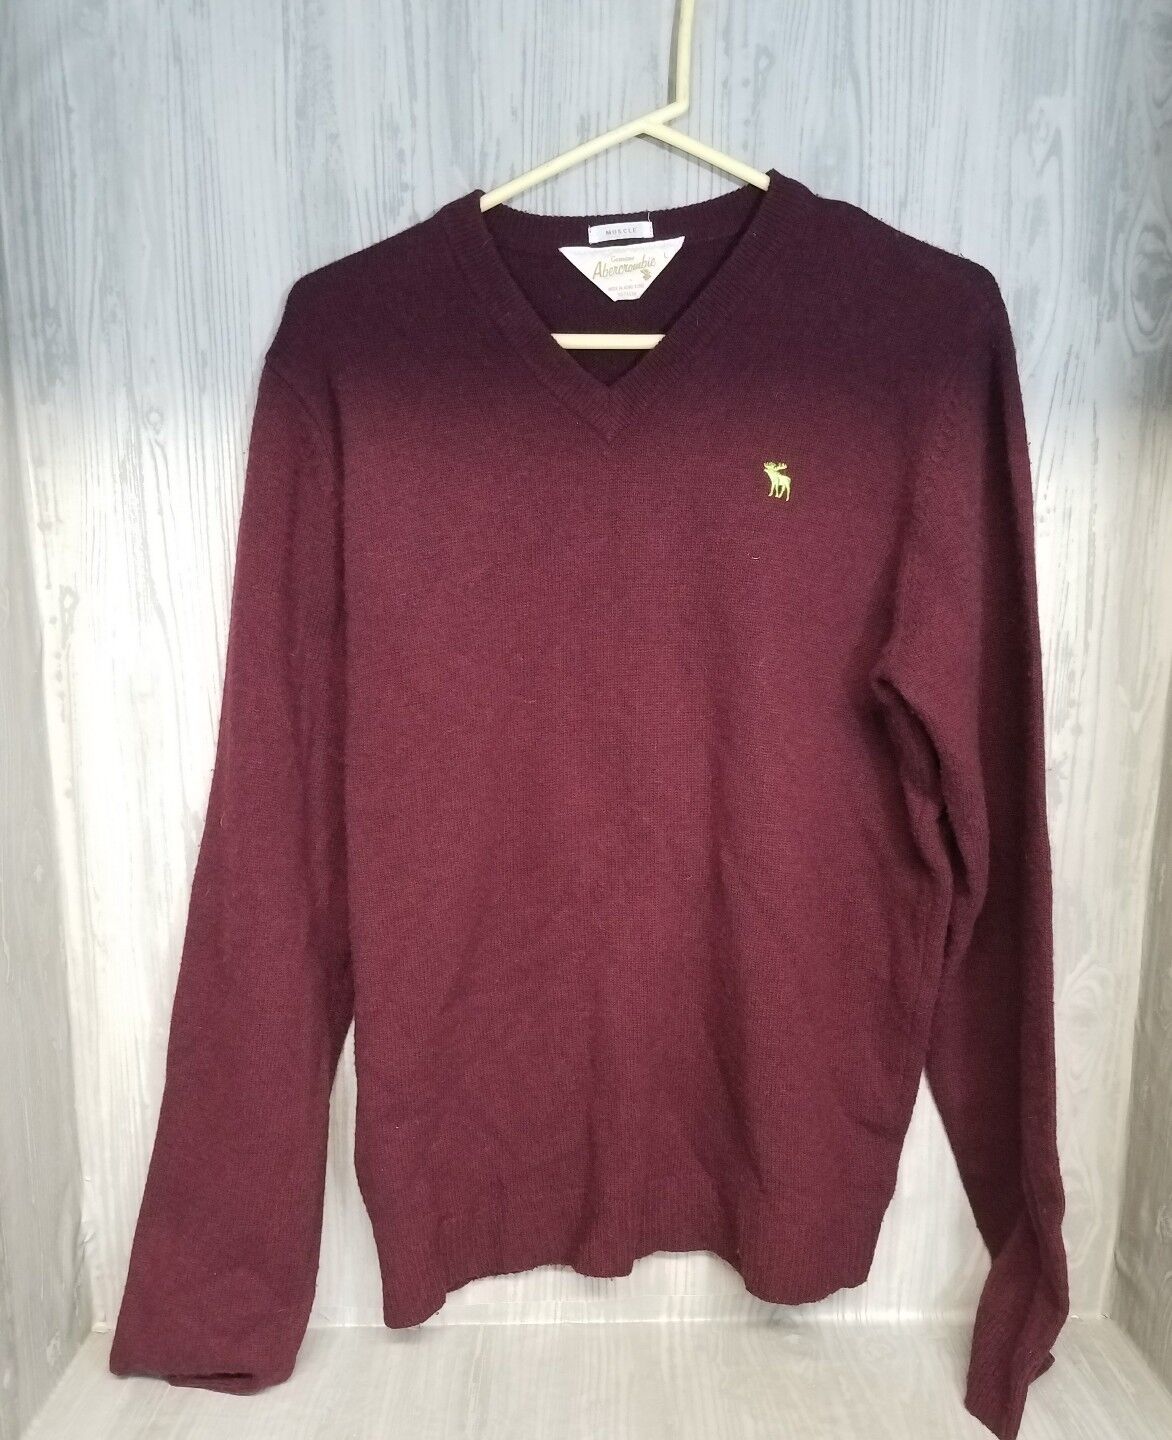 Vintage Abercrombie & Fitch Men Sweater V Neck Muscle Maroon Size L #26 